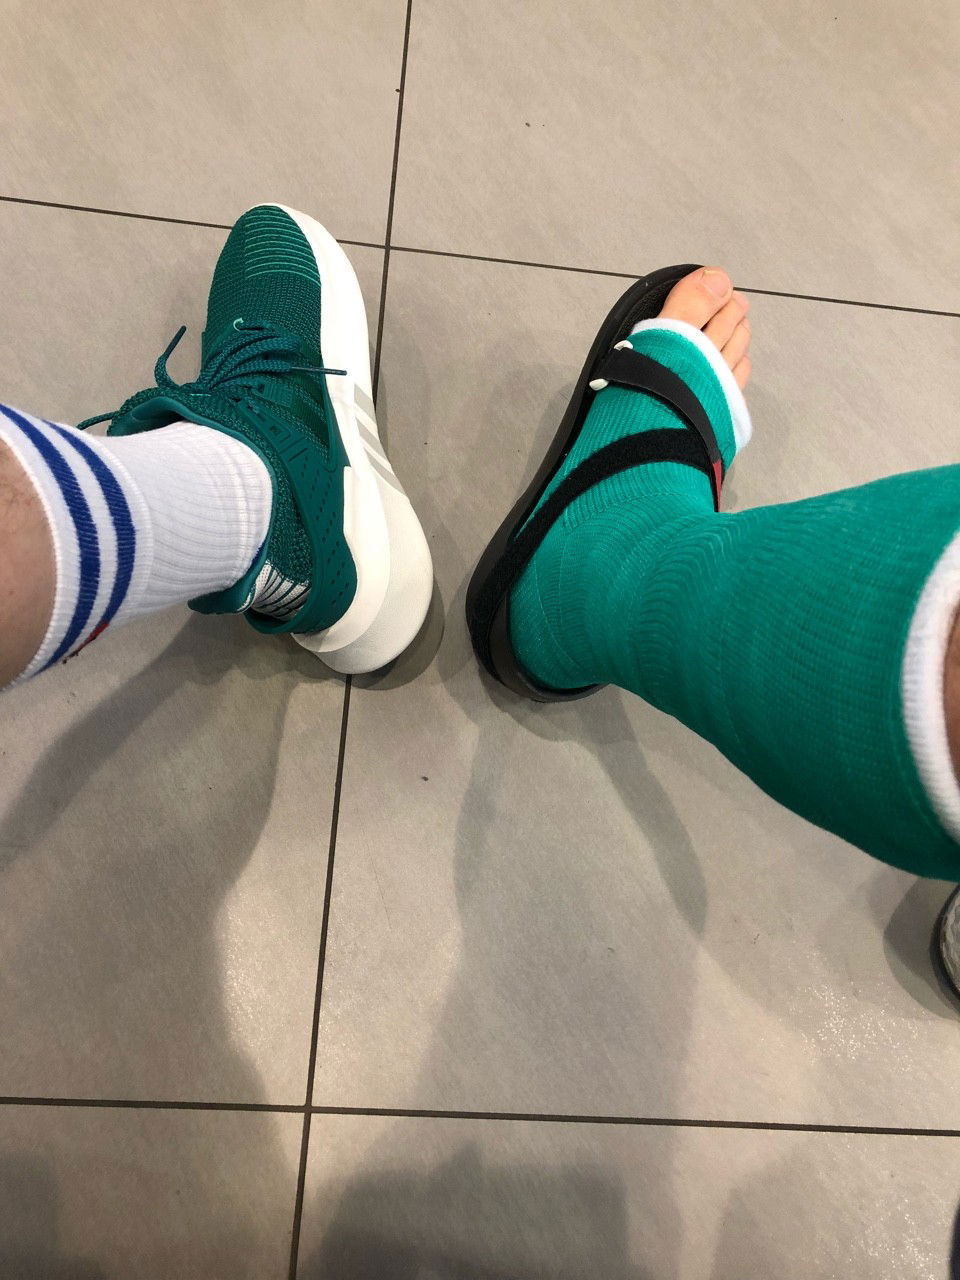 Photo by ampstef with the username @ampstef,  June 29, 2018 at 8:50 PM and the text says 'castmande:

Shell i buy some new #sneakers ? #brokenleg #brokenfoot #brokenankle #gaysneakers #gayfetish'